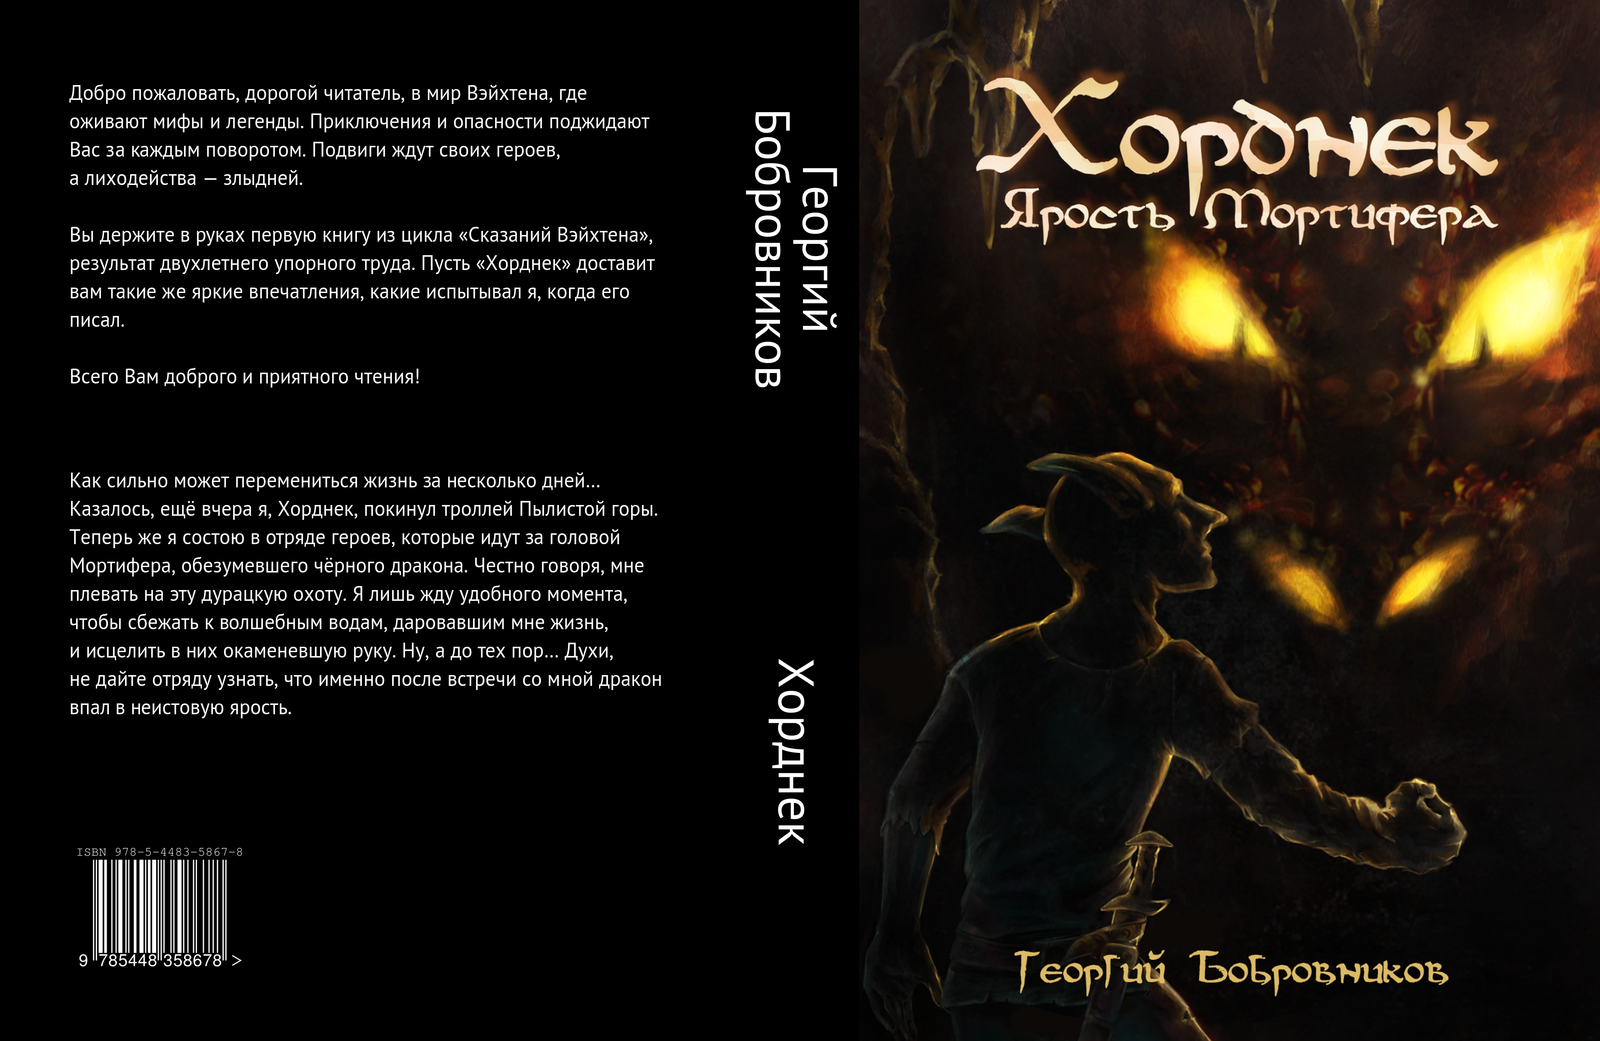 My book came out yesterday - My, Chordnek, Fantasy, Creation, Literature, Books, The Dragon, Adventures